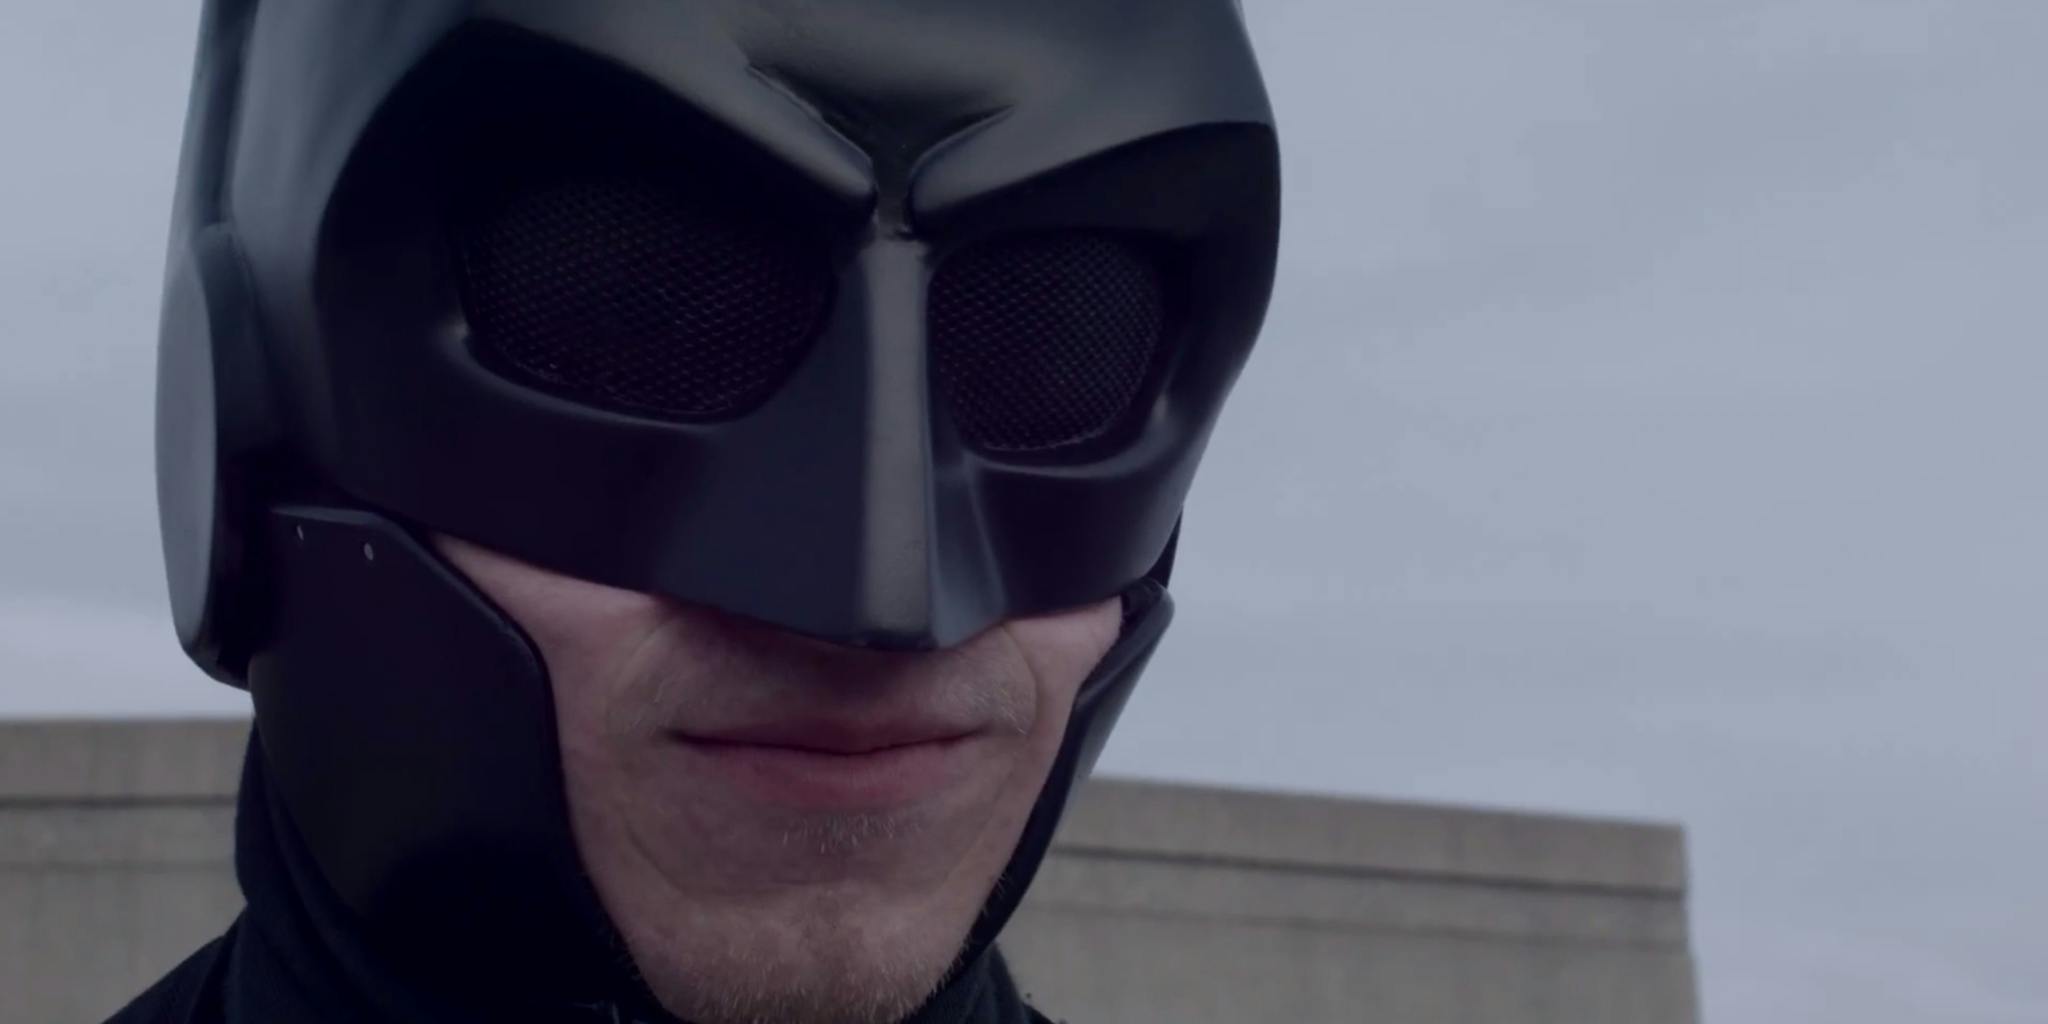 Here's the world's first combat-ready Batman suit in action - The Daily Dot